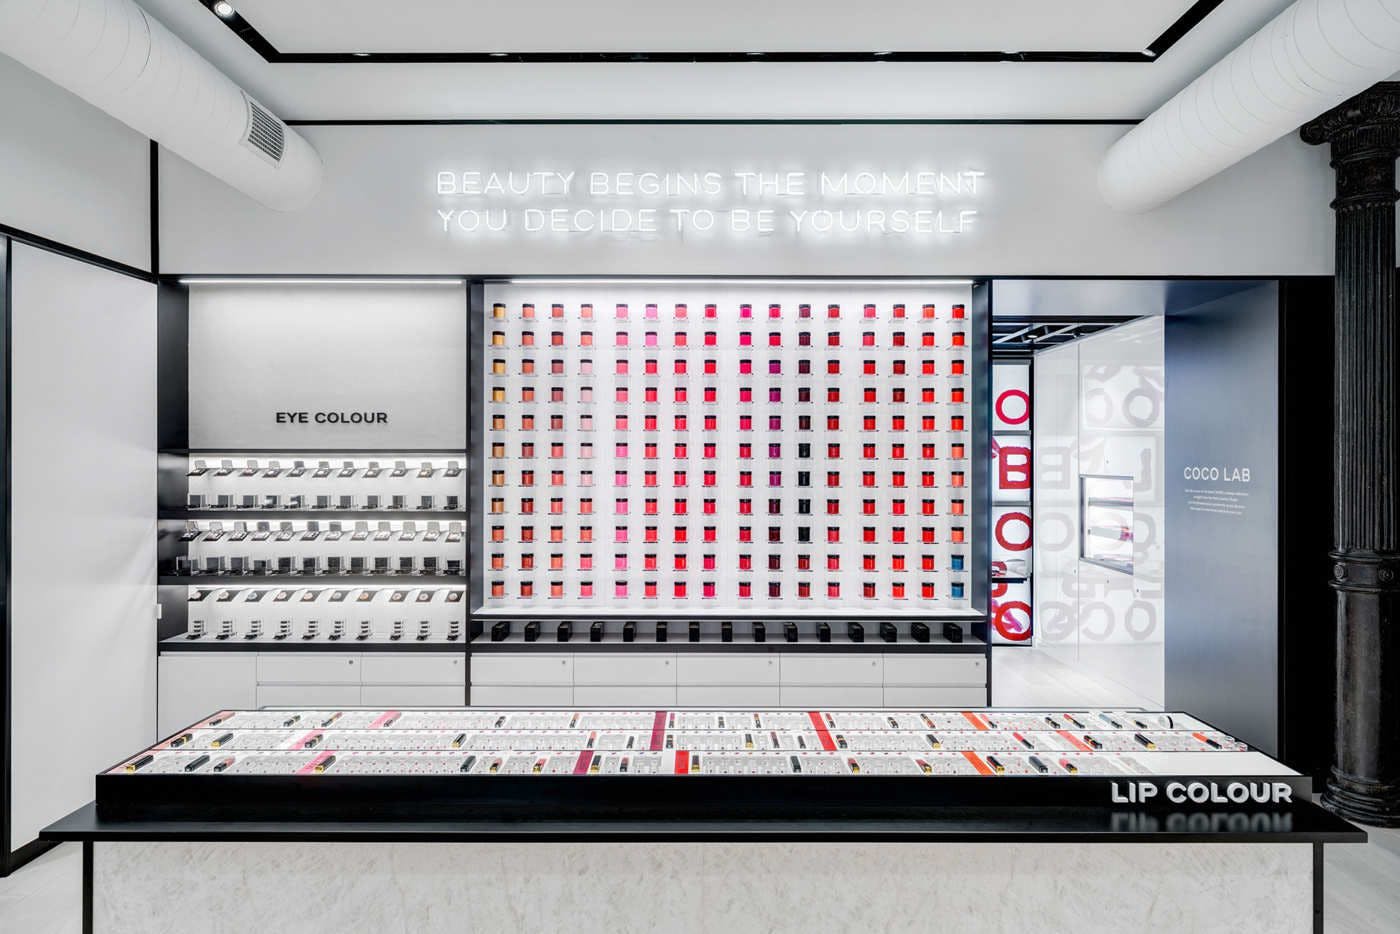 CHANEL Makeup for sale in New York, New York